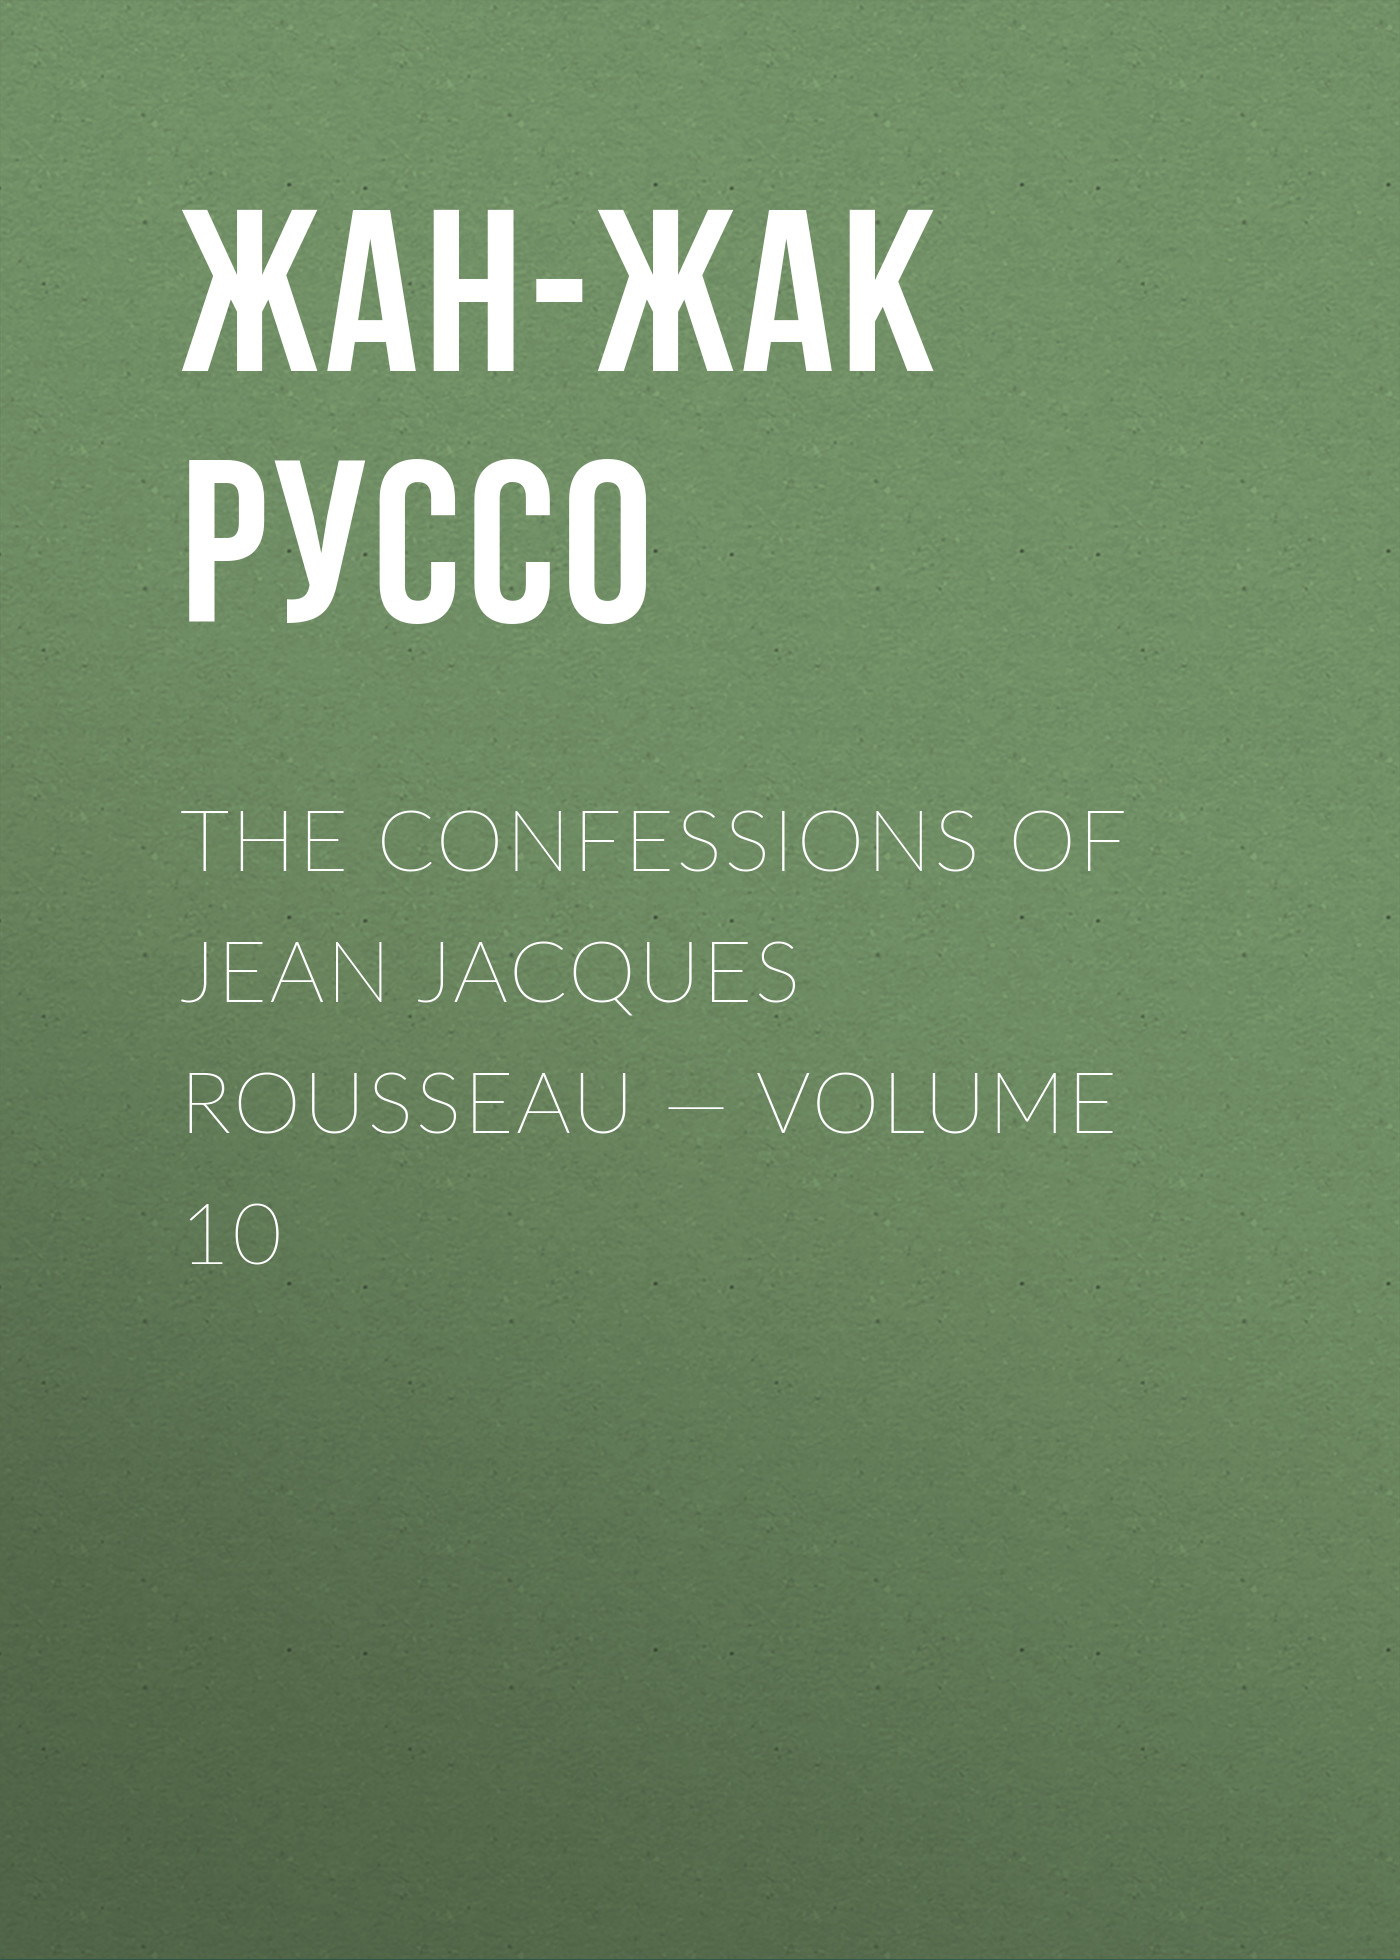 The Confessions of Jean Jacques Rousseau— Volume 10